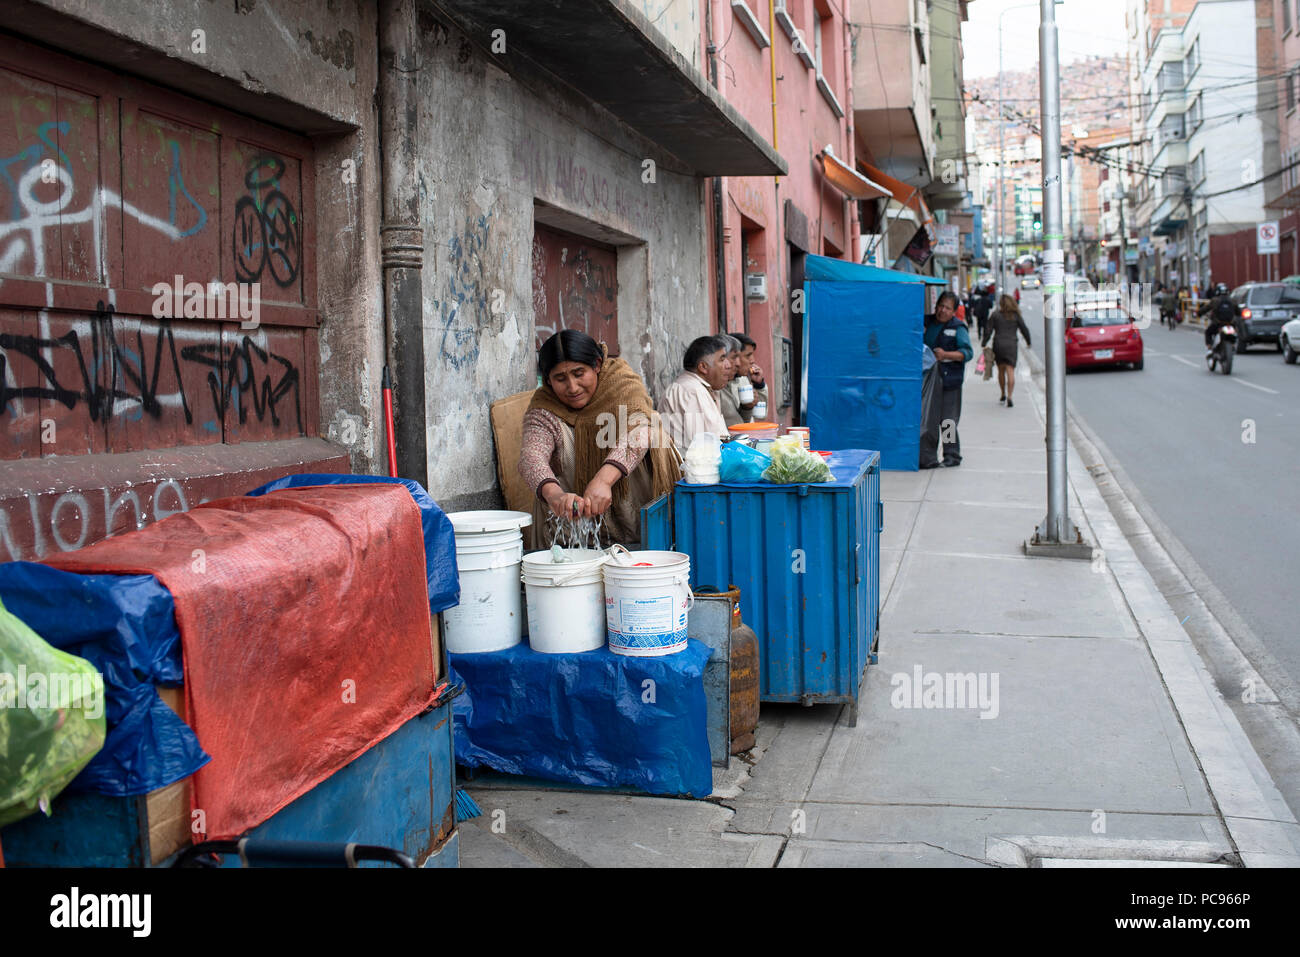 Street food vendor cleaning up after lunch time. Jun 2018 Stock Photo